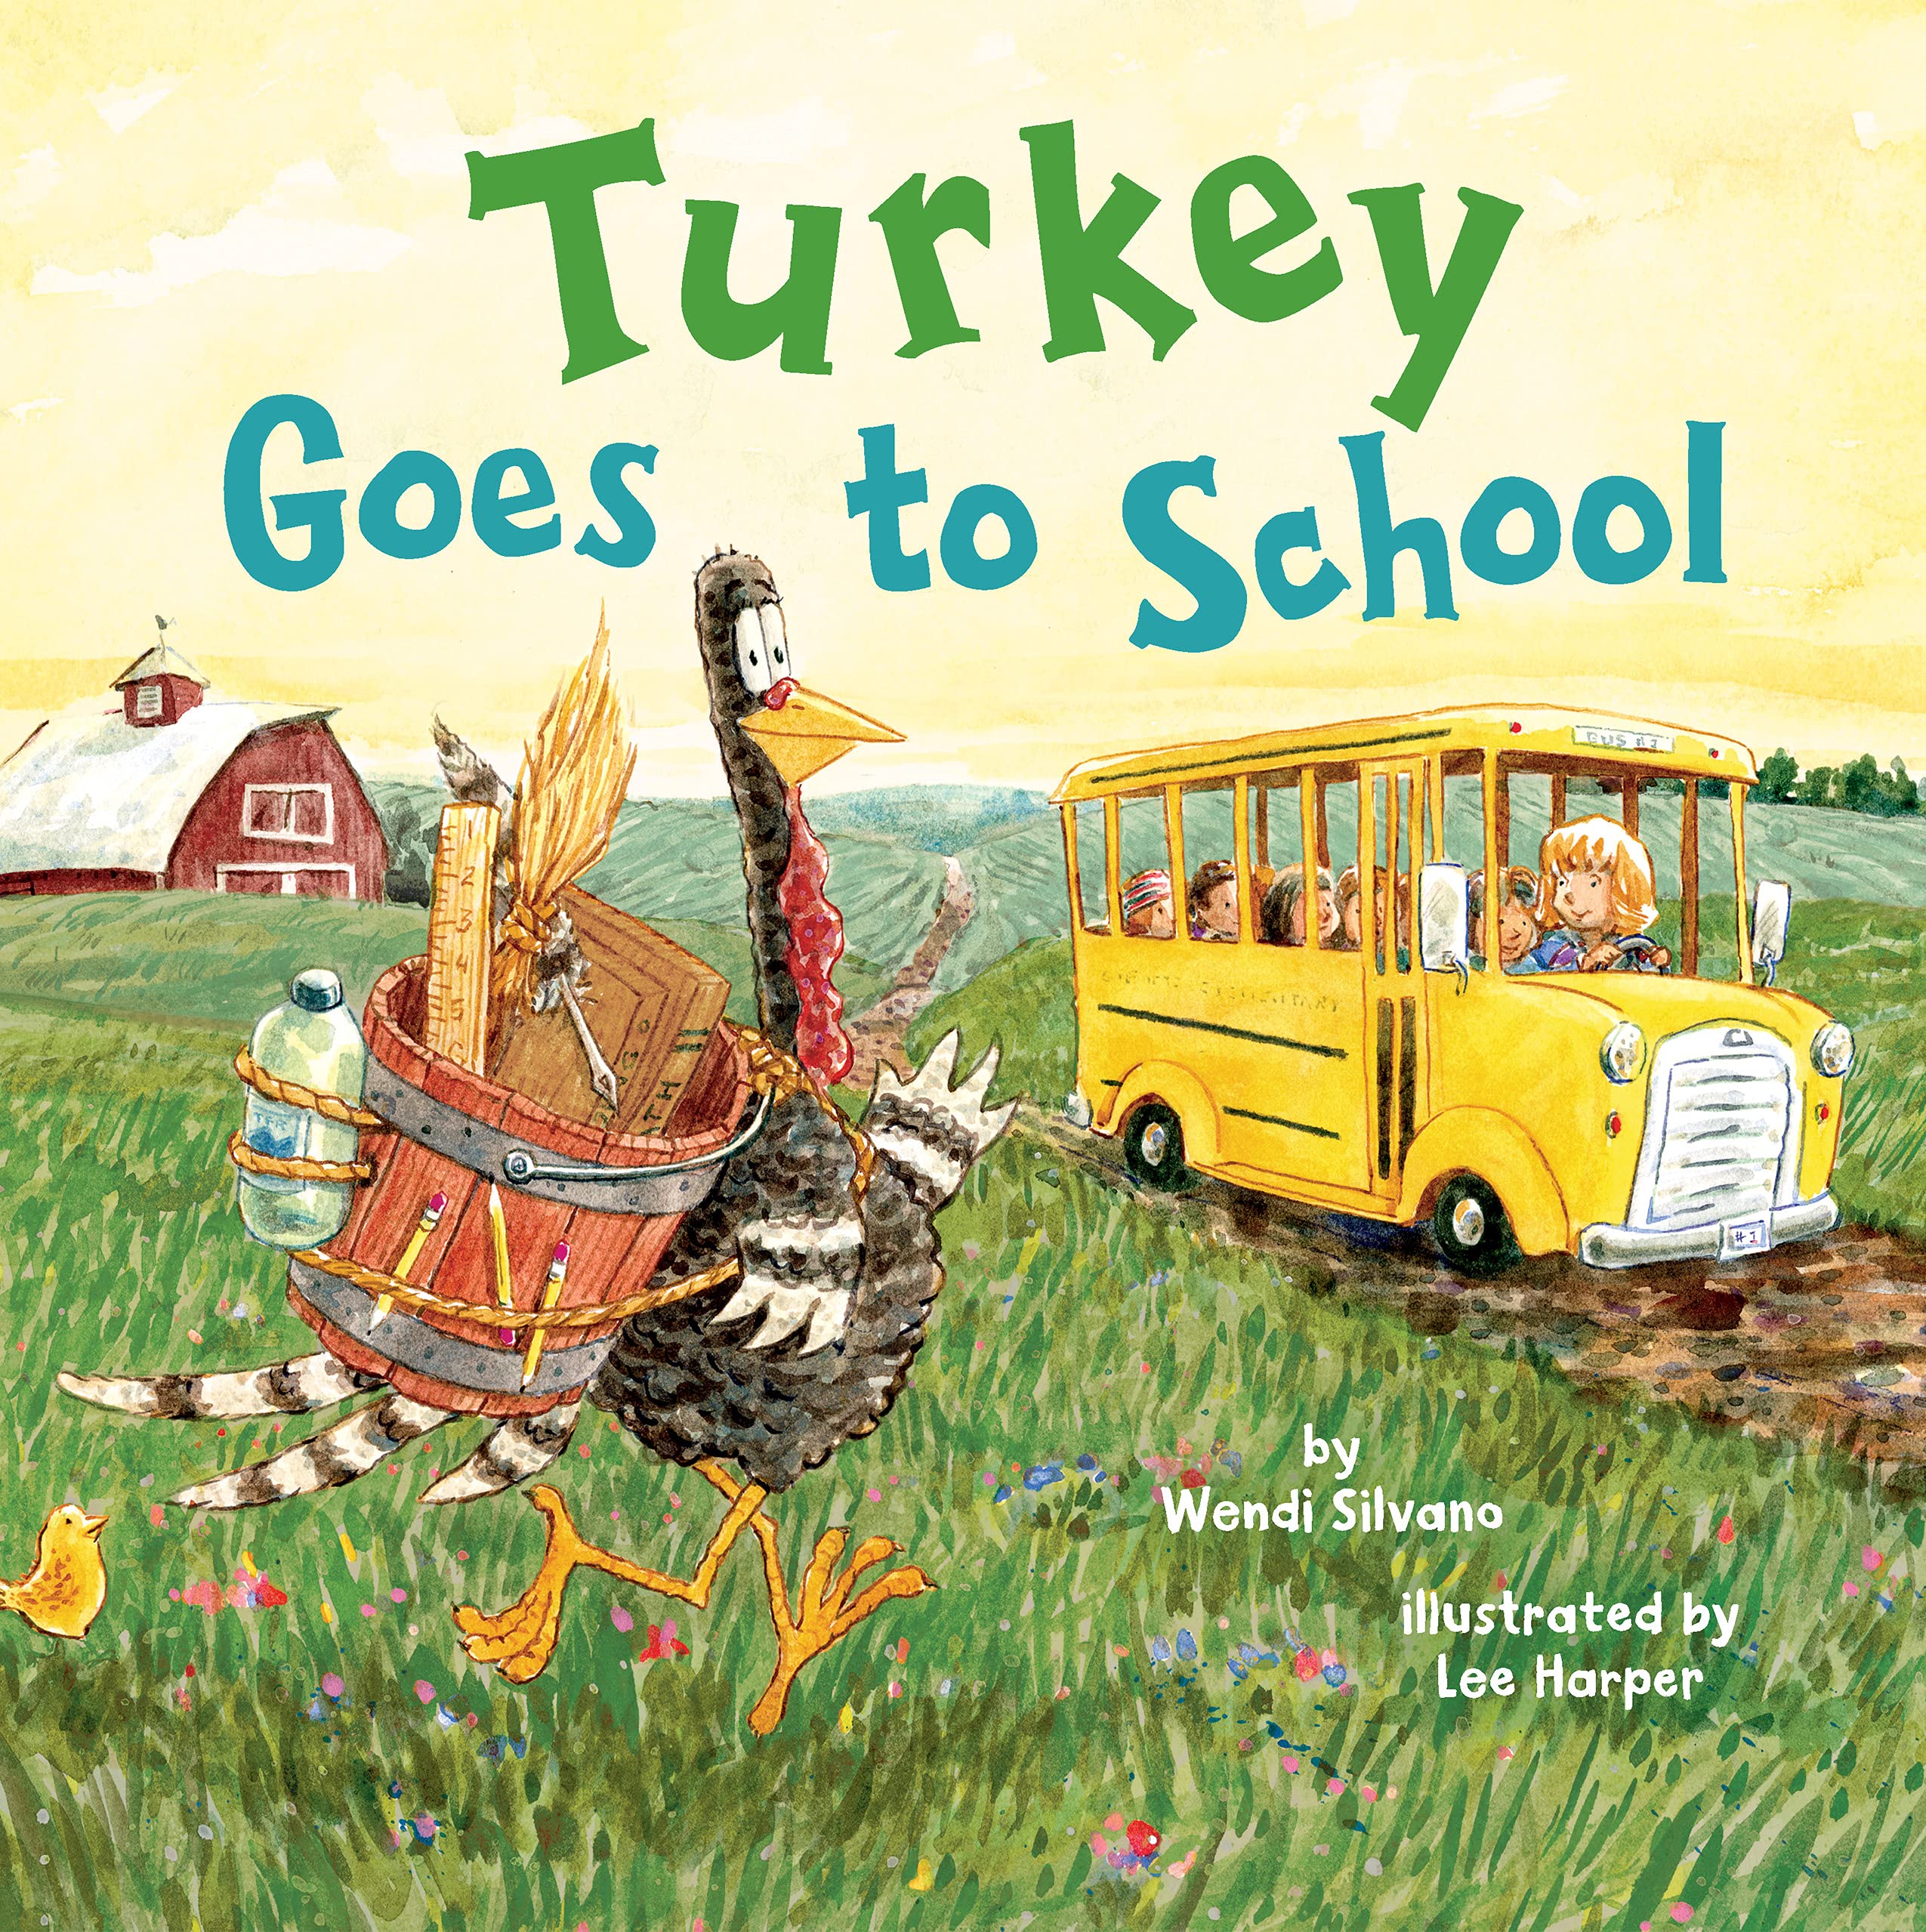 speech and language teaching concepts for Turkey Goes to School in speech therapy